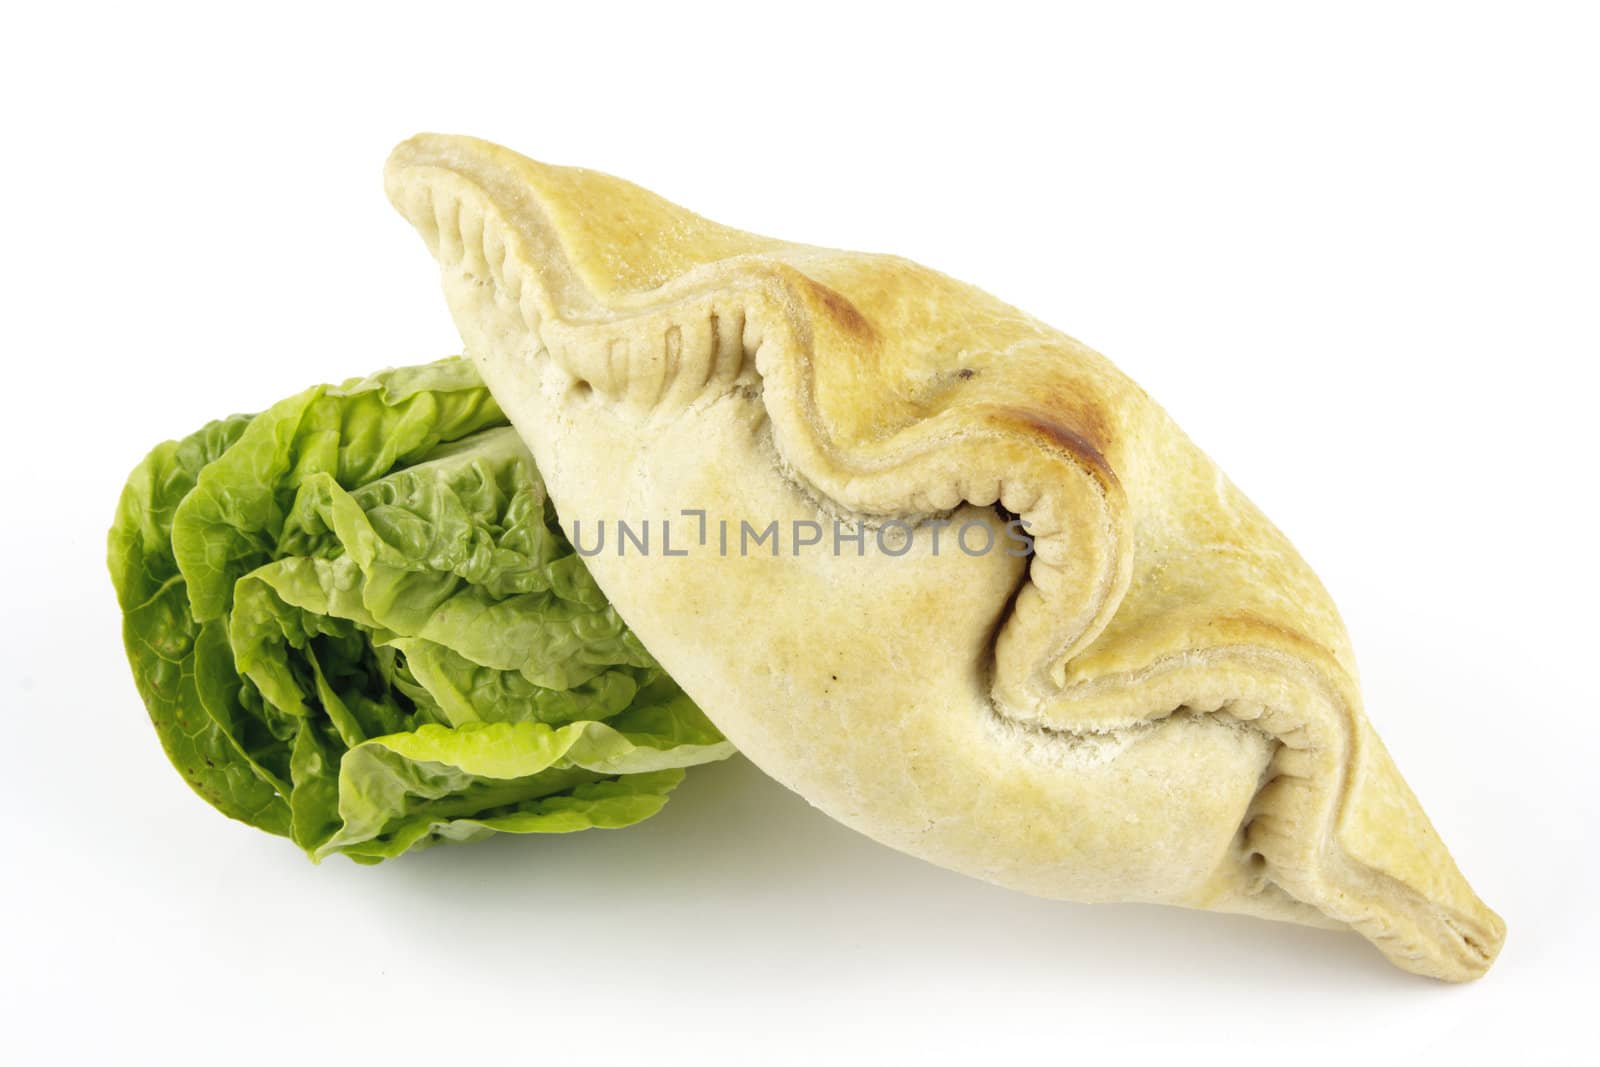 Contradiction between healthy food and junk food using a green salad lettace and pasty on a reflective white background 